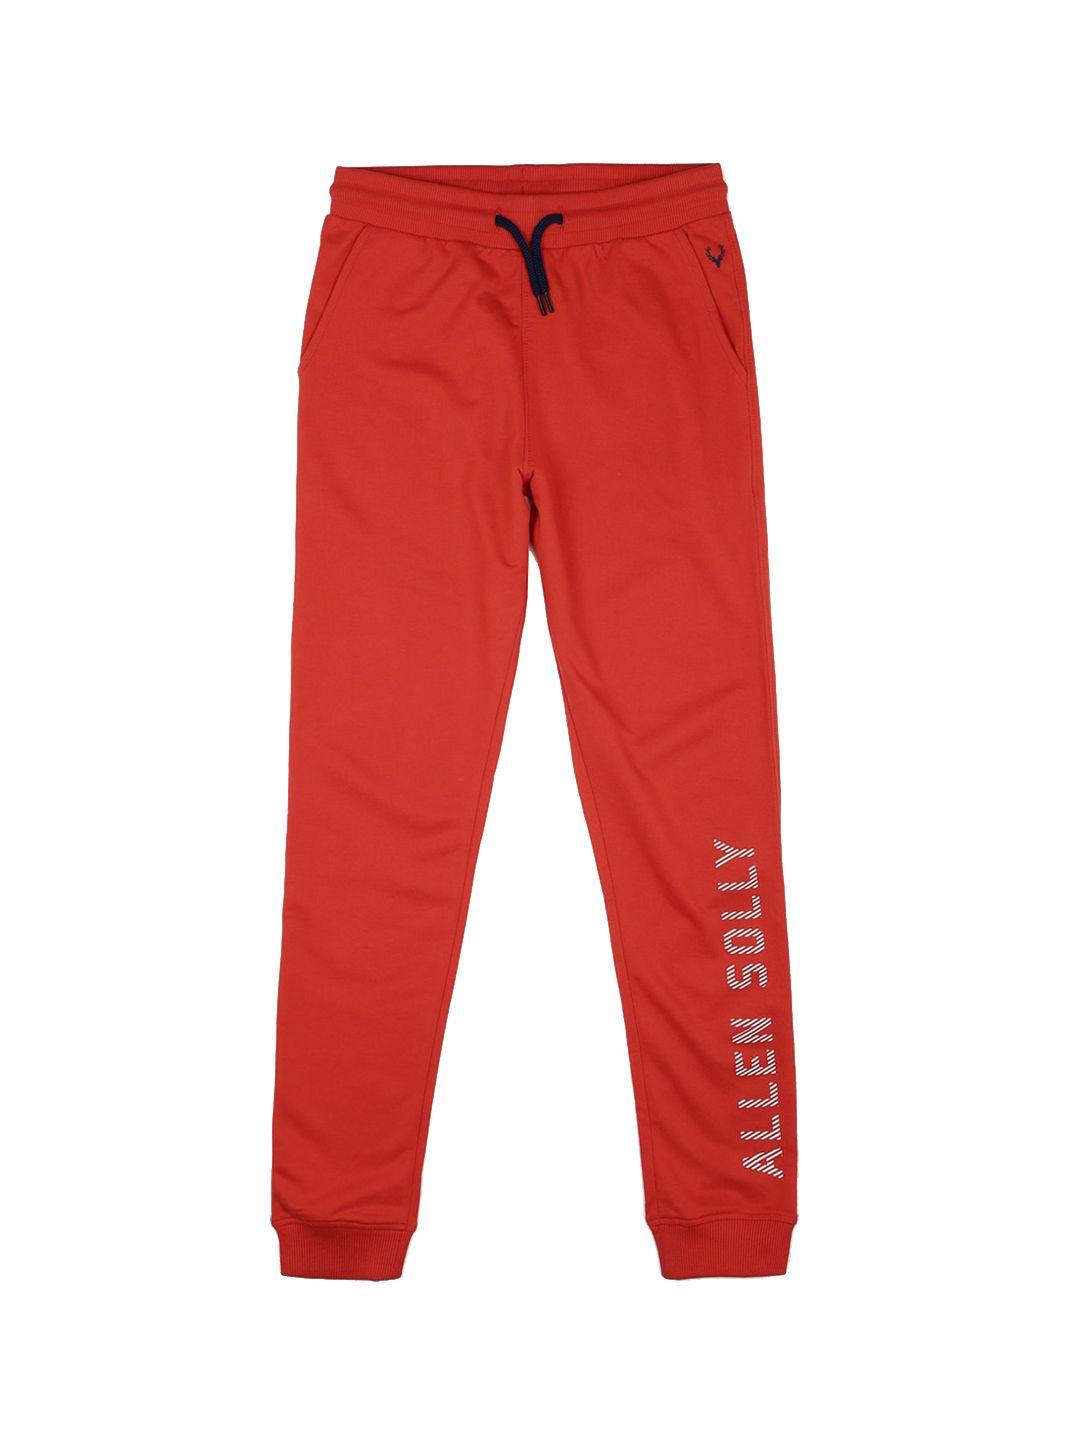 Allen Solly Junior Boys Red & White Regular Fit Printed Joggers